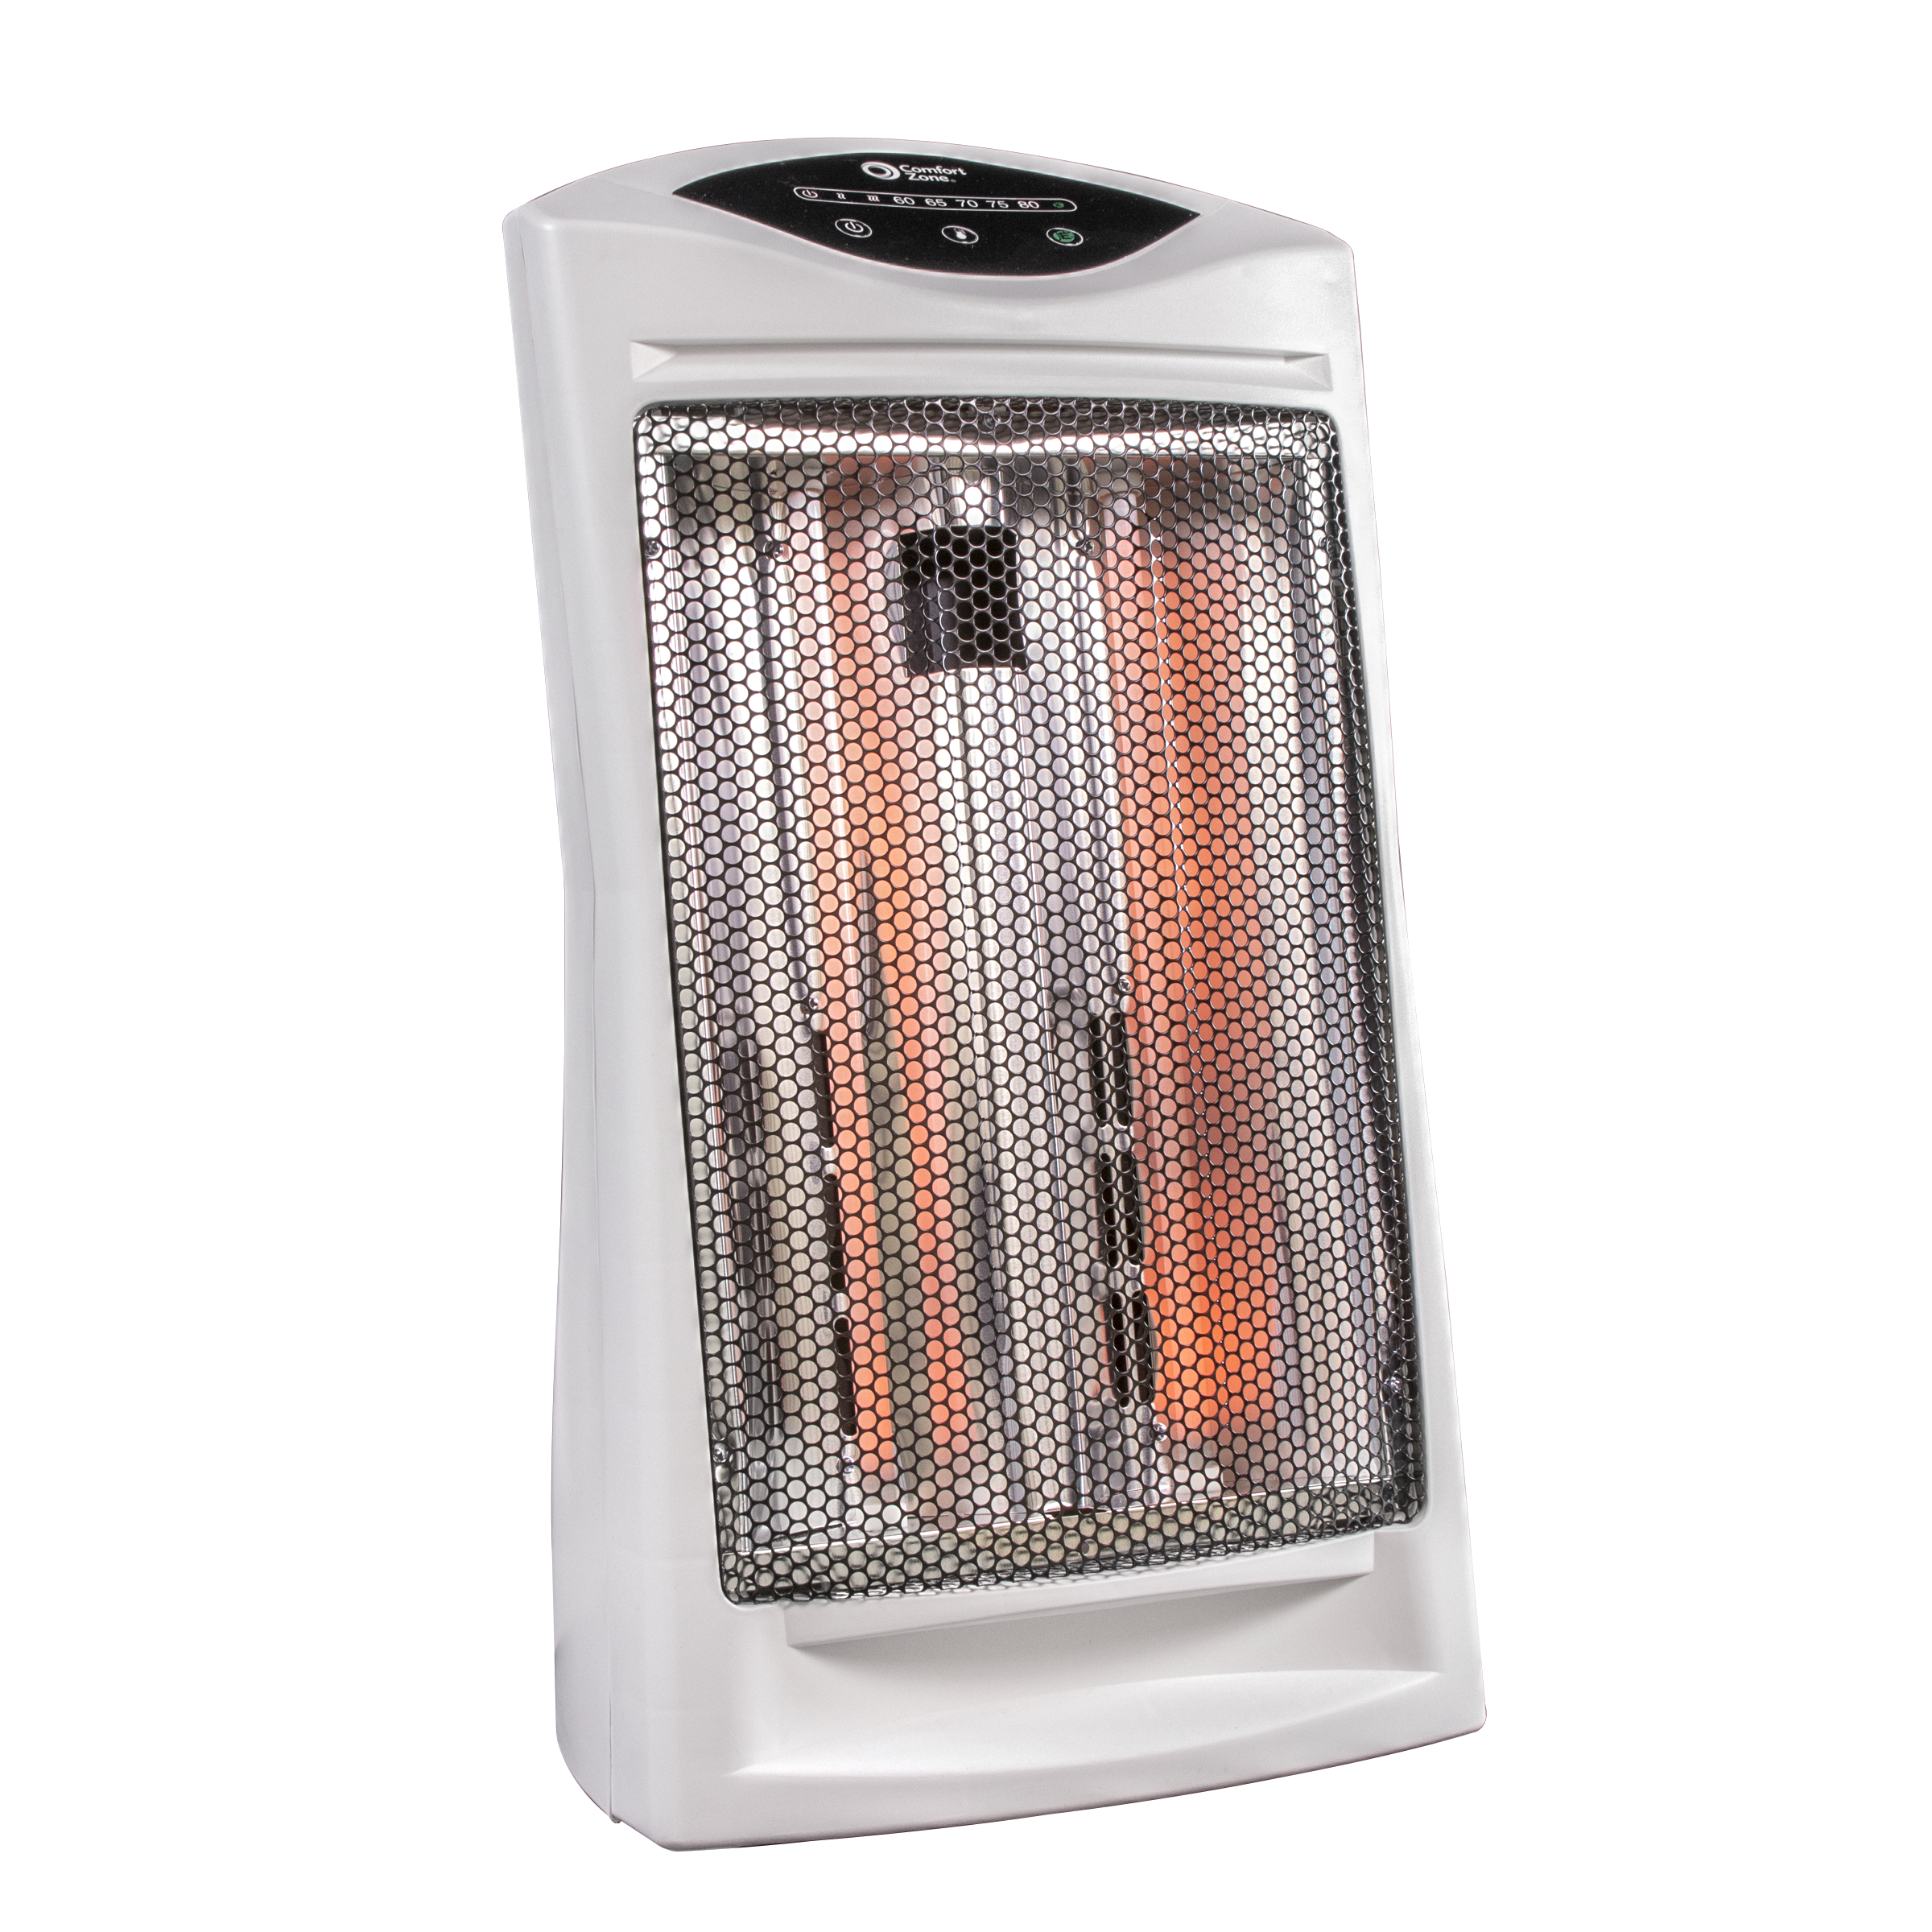 Portable Infrared Space Heater Radiant Quartz Heater for Indoor/2 Heat Settings 